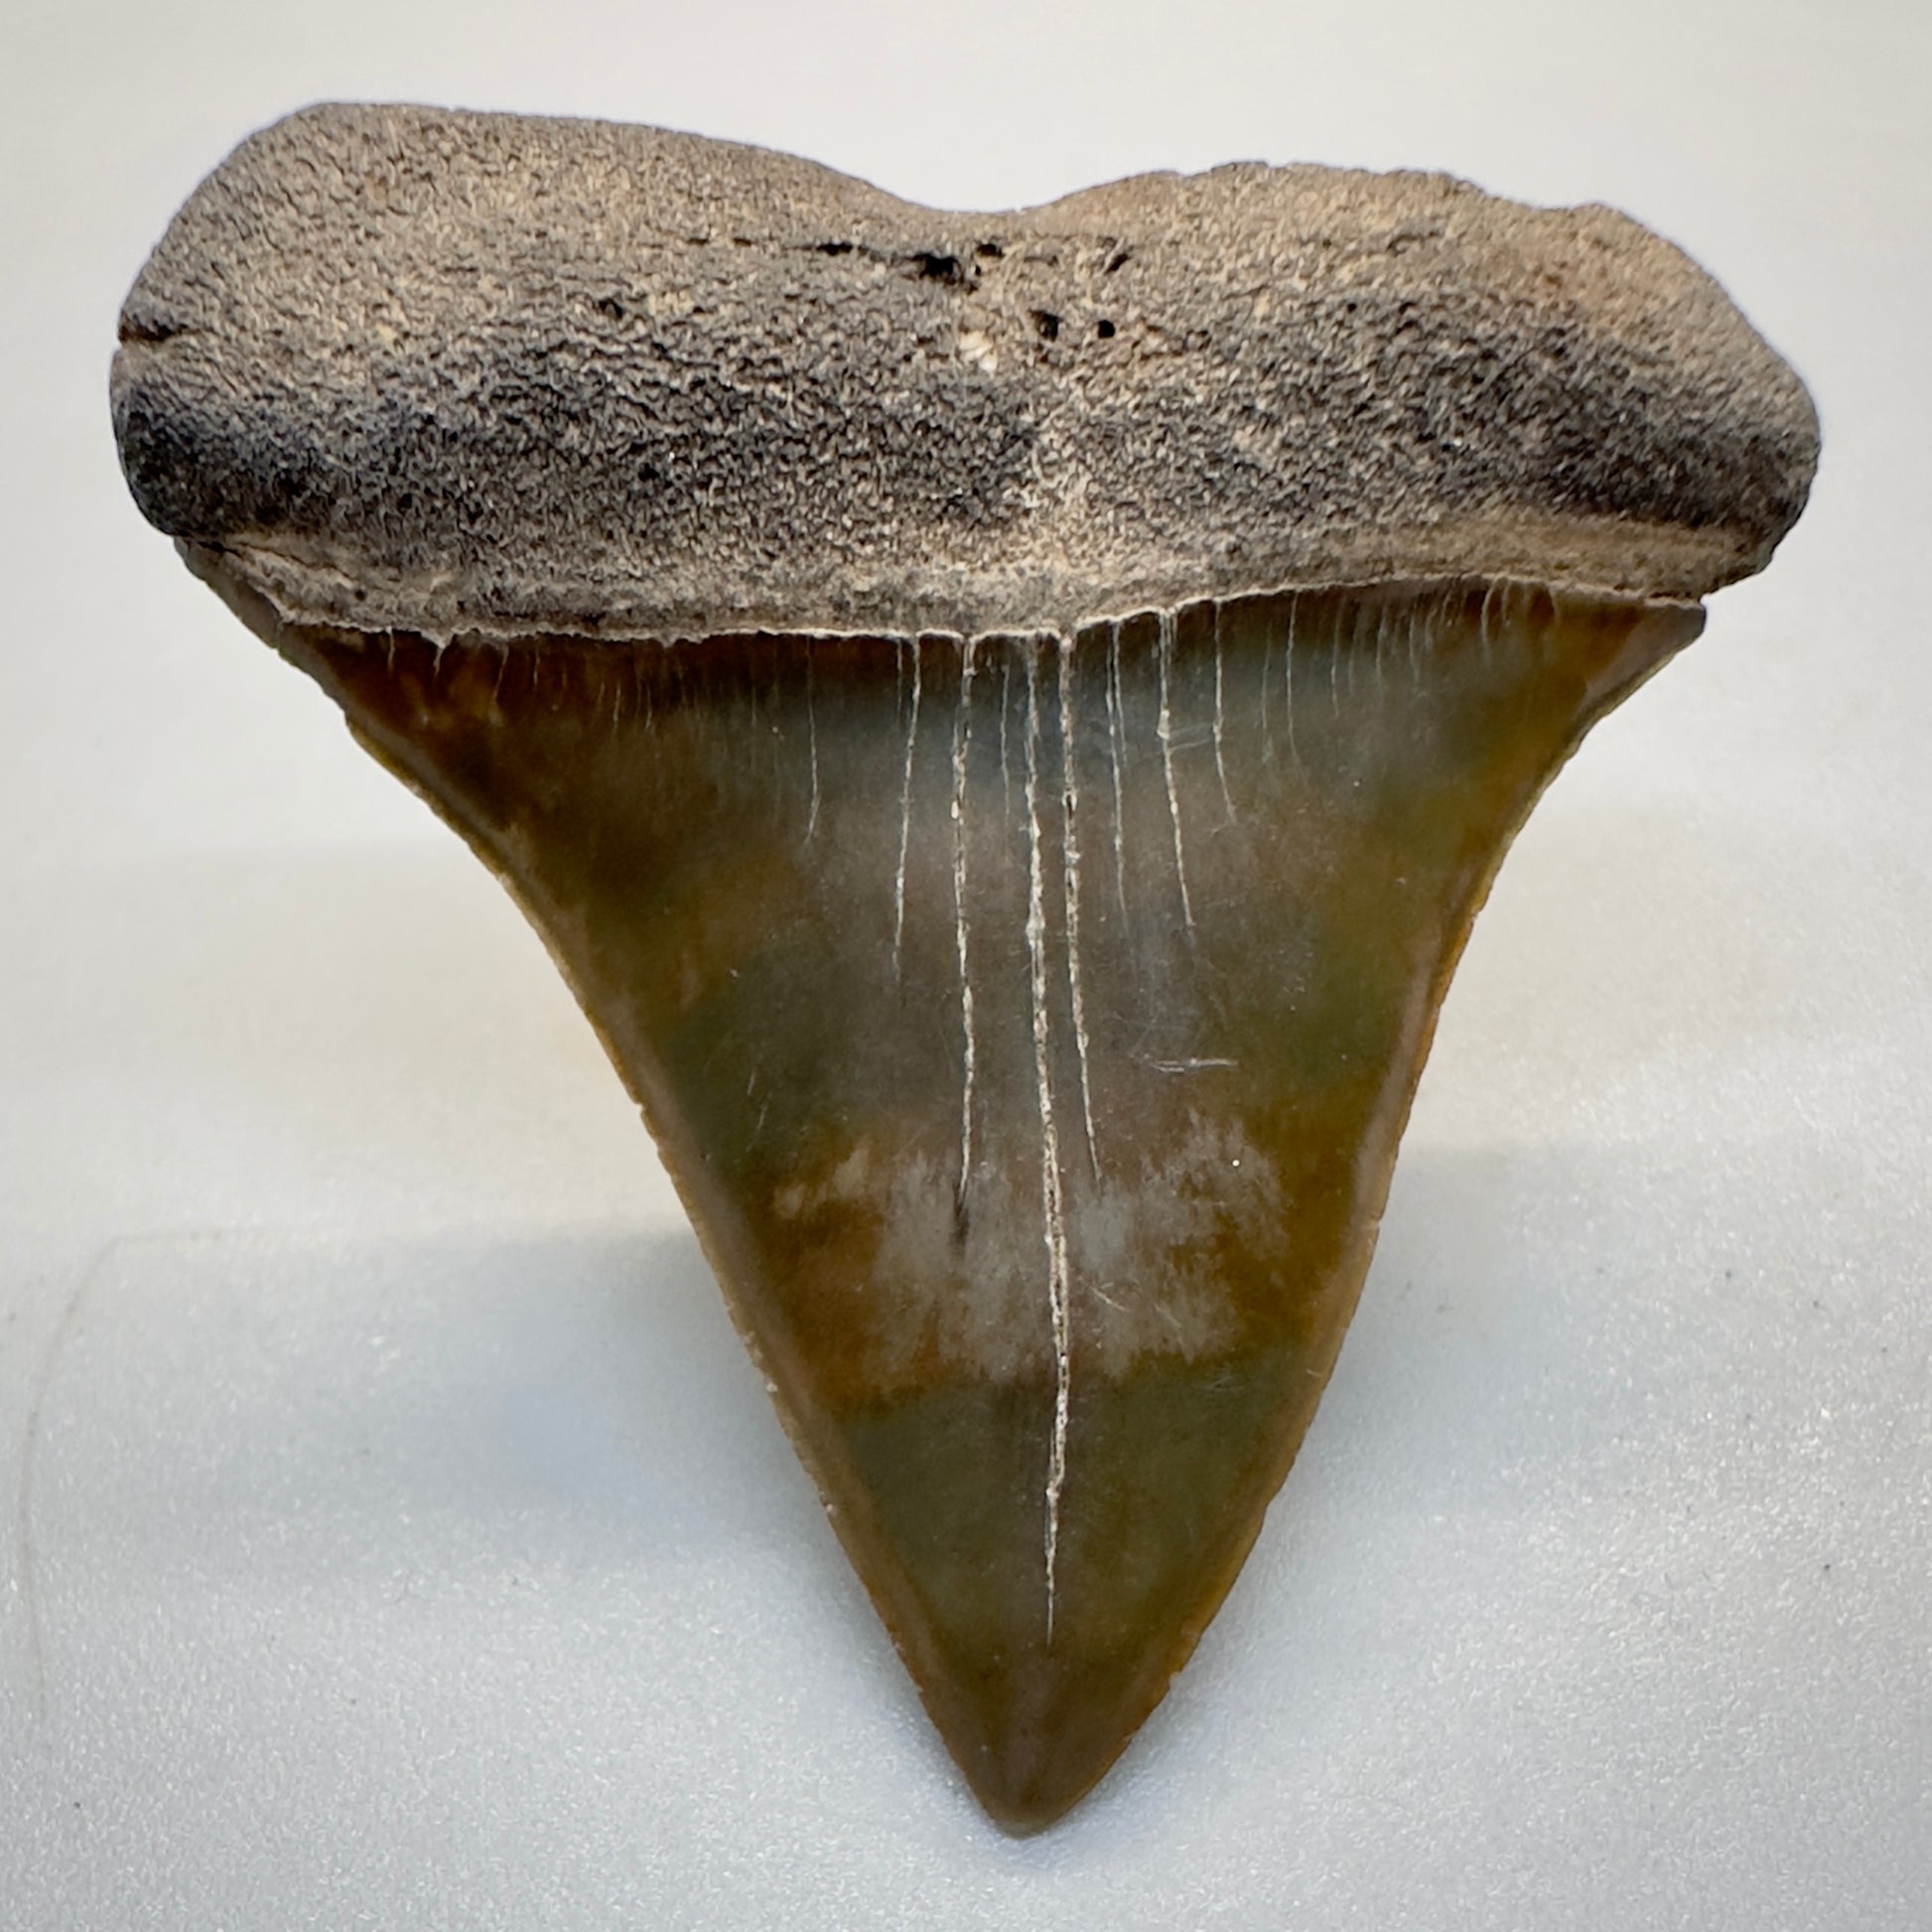 1.74 inches colorful Extinct Mako - isurus hastalis shark tooth from southeast, USA M511 front down